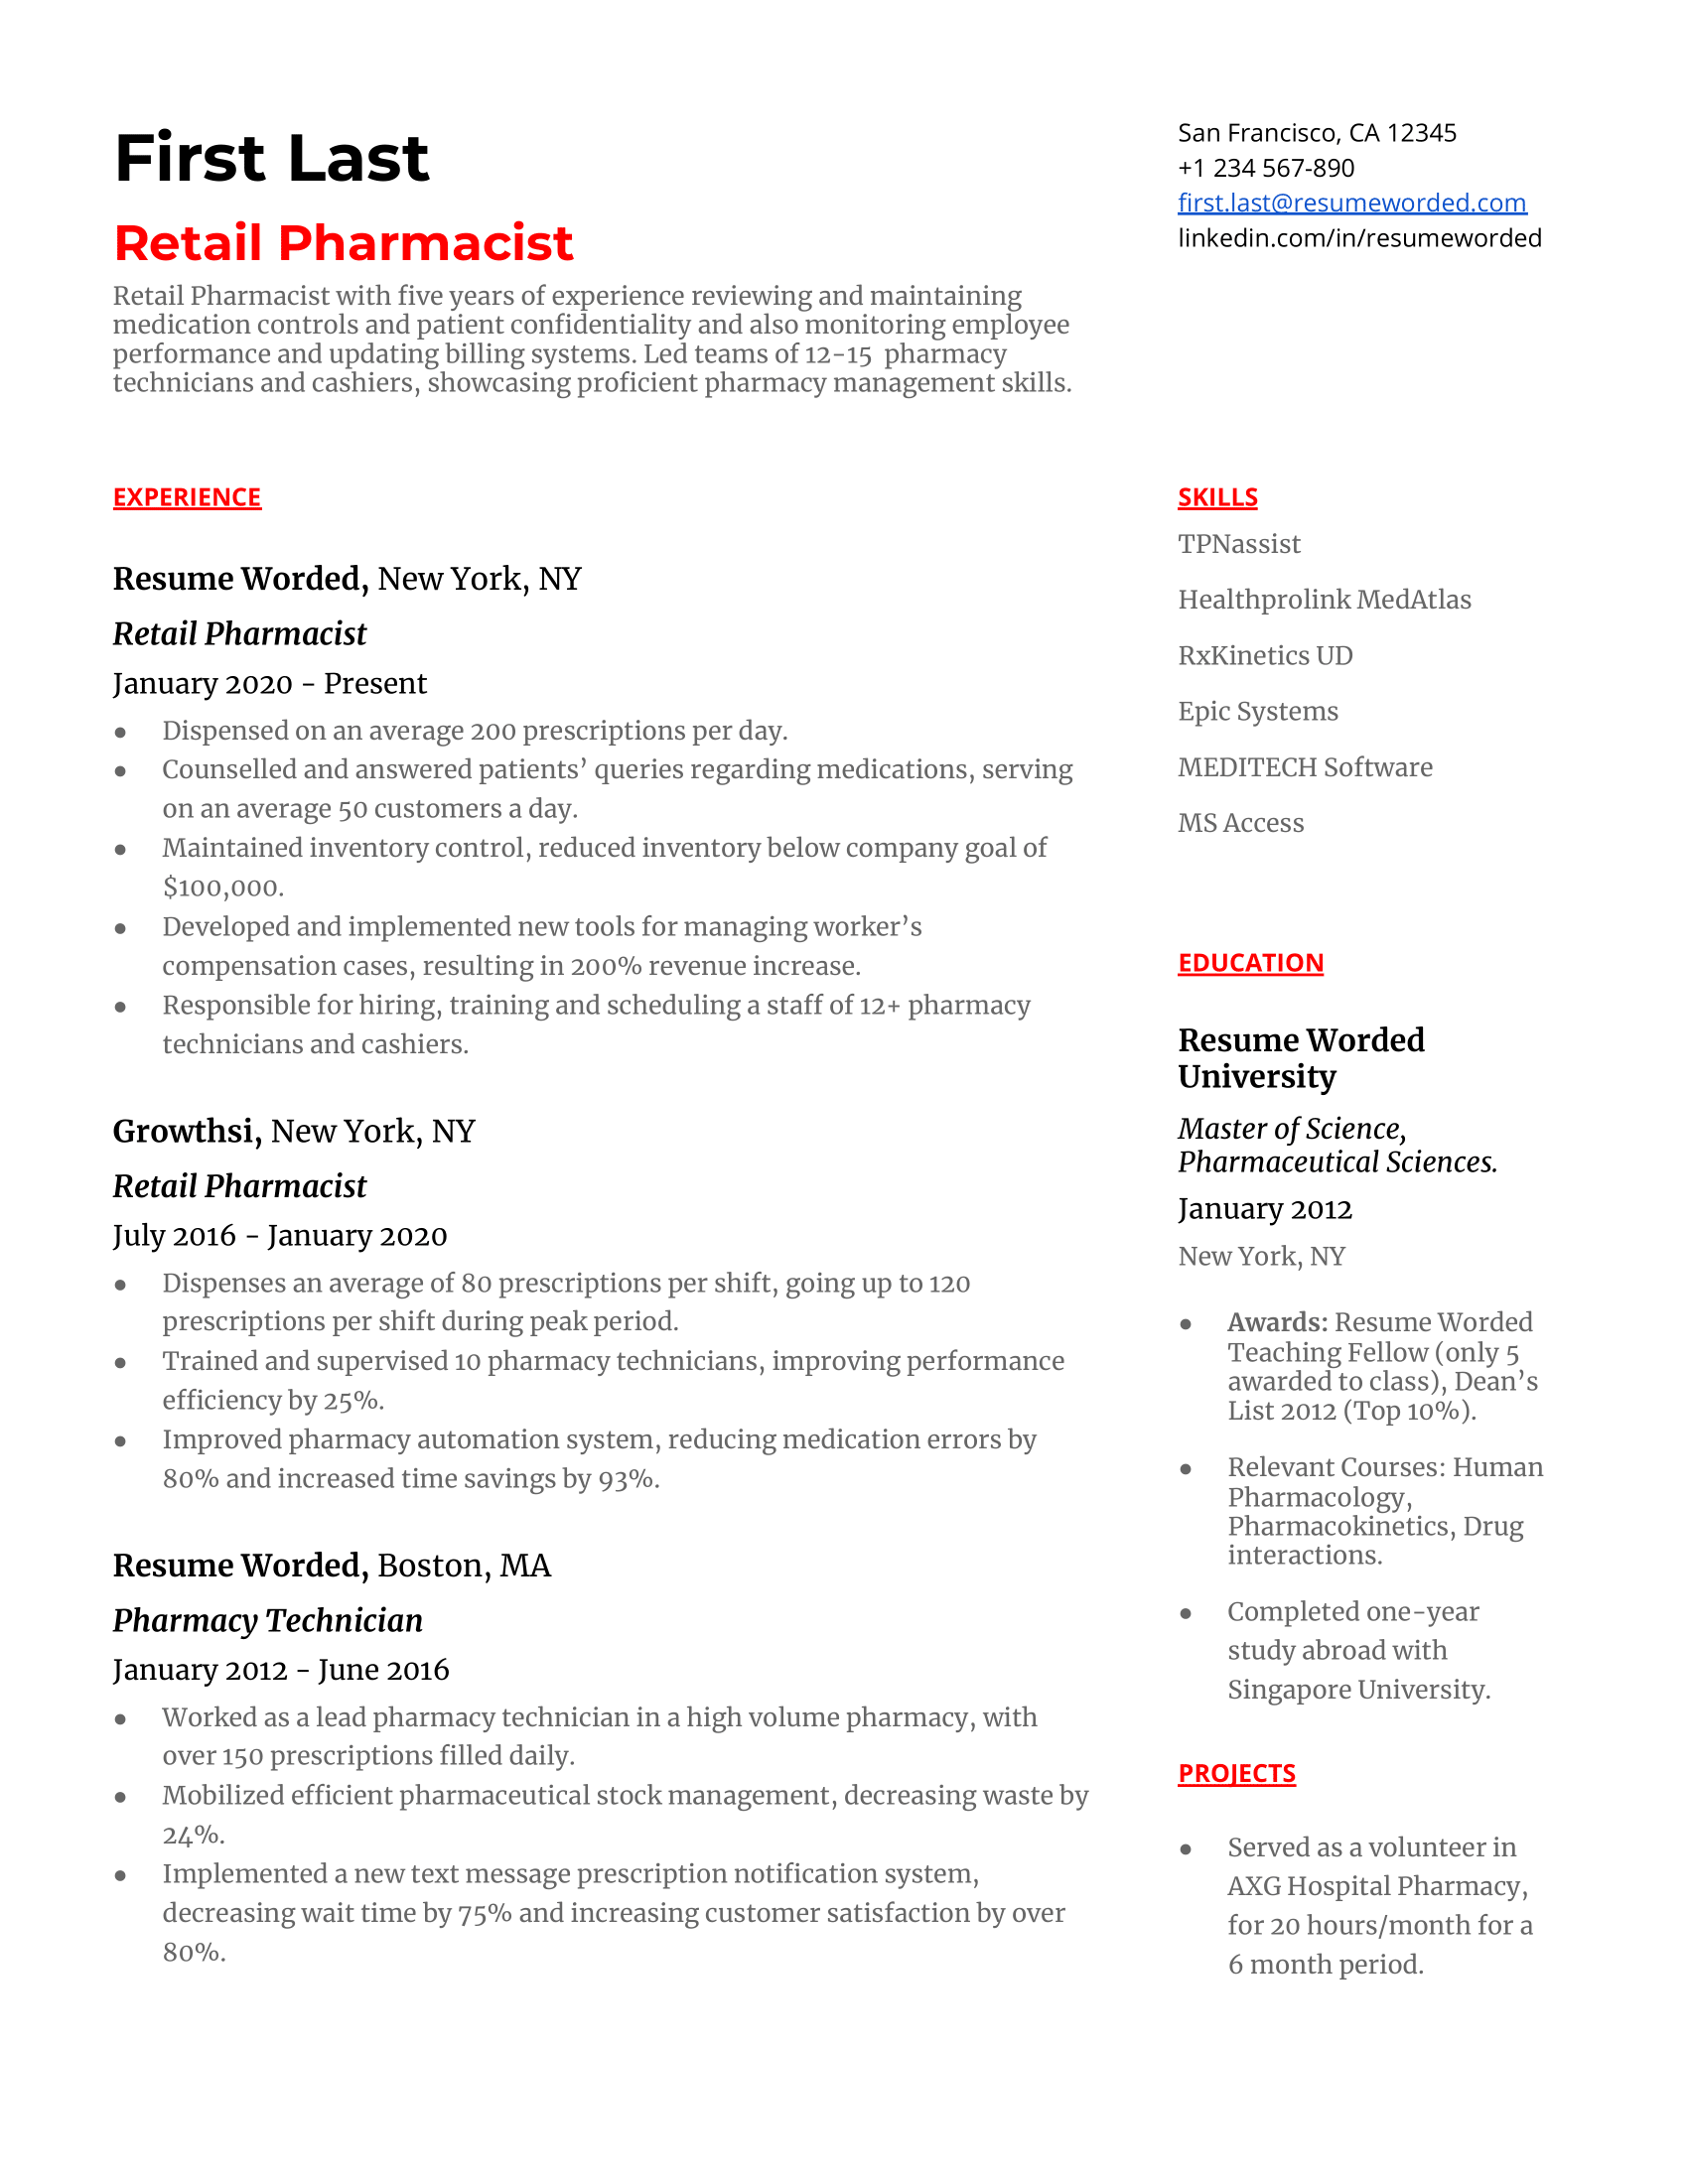 CV of a retail pharmacist highlighting pharmaceutical skills and customer service experience.